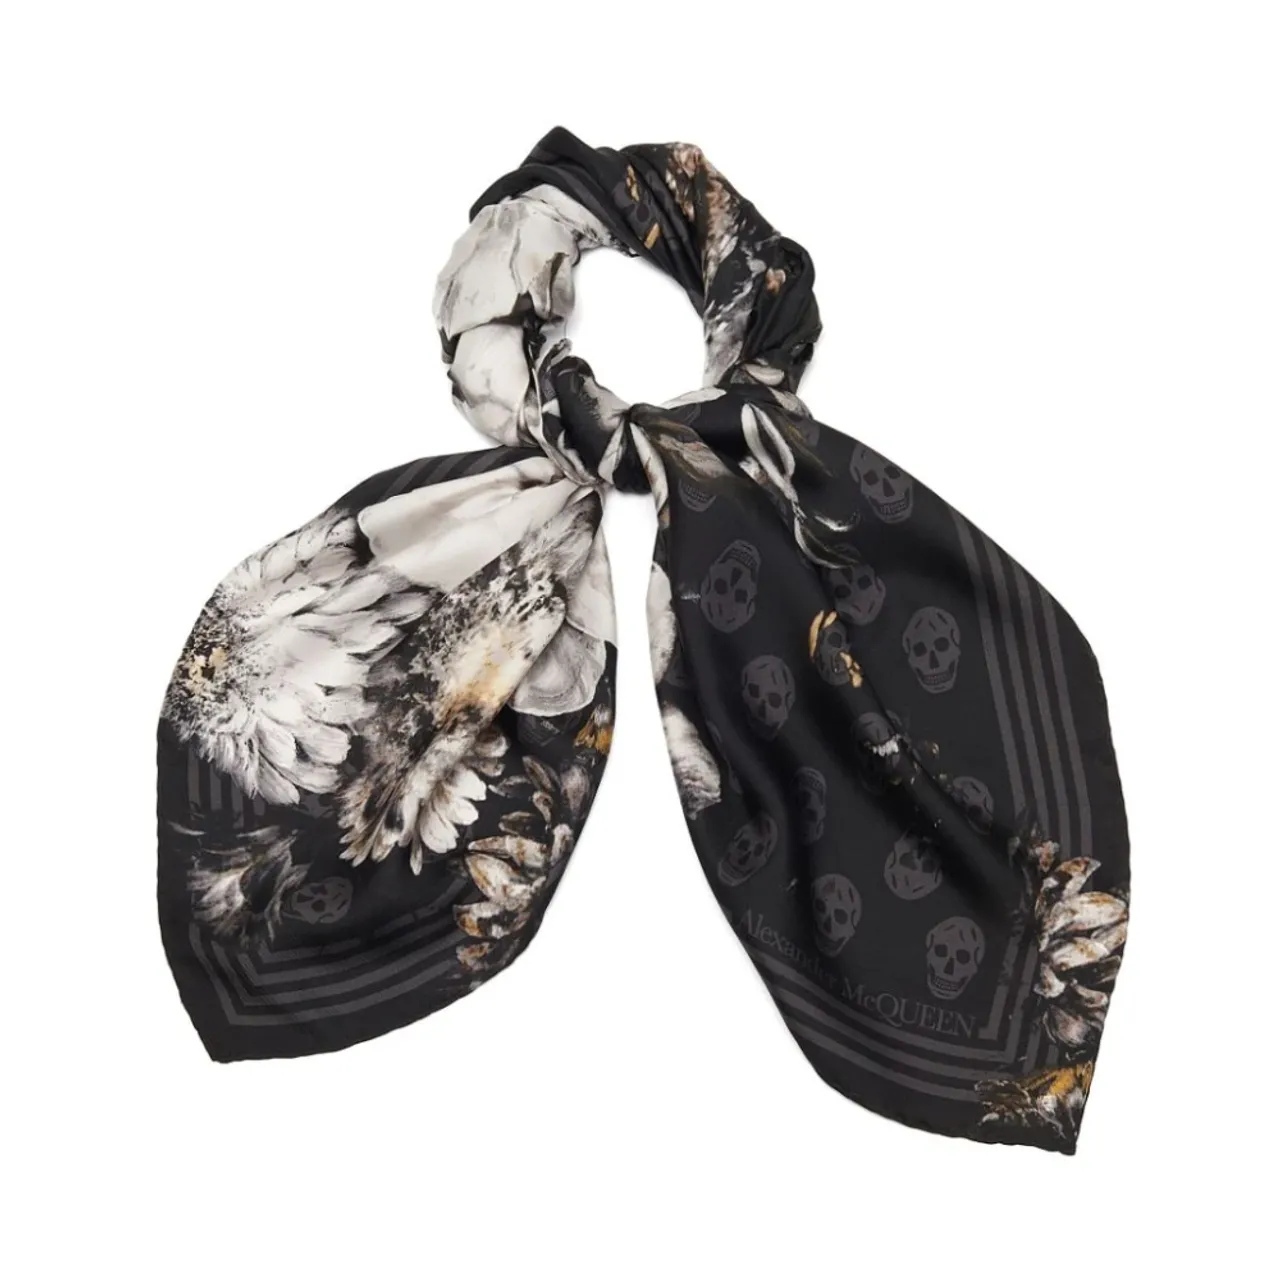 Alexander McQueen , Silk Floral Print Scarf with Skull Print Border ,Gray female, Sizes: ONE